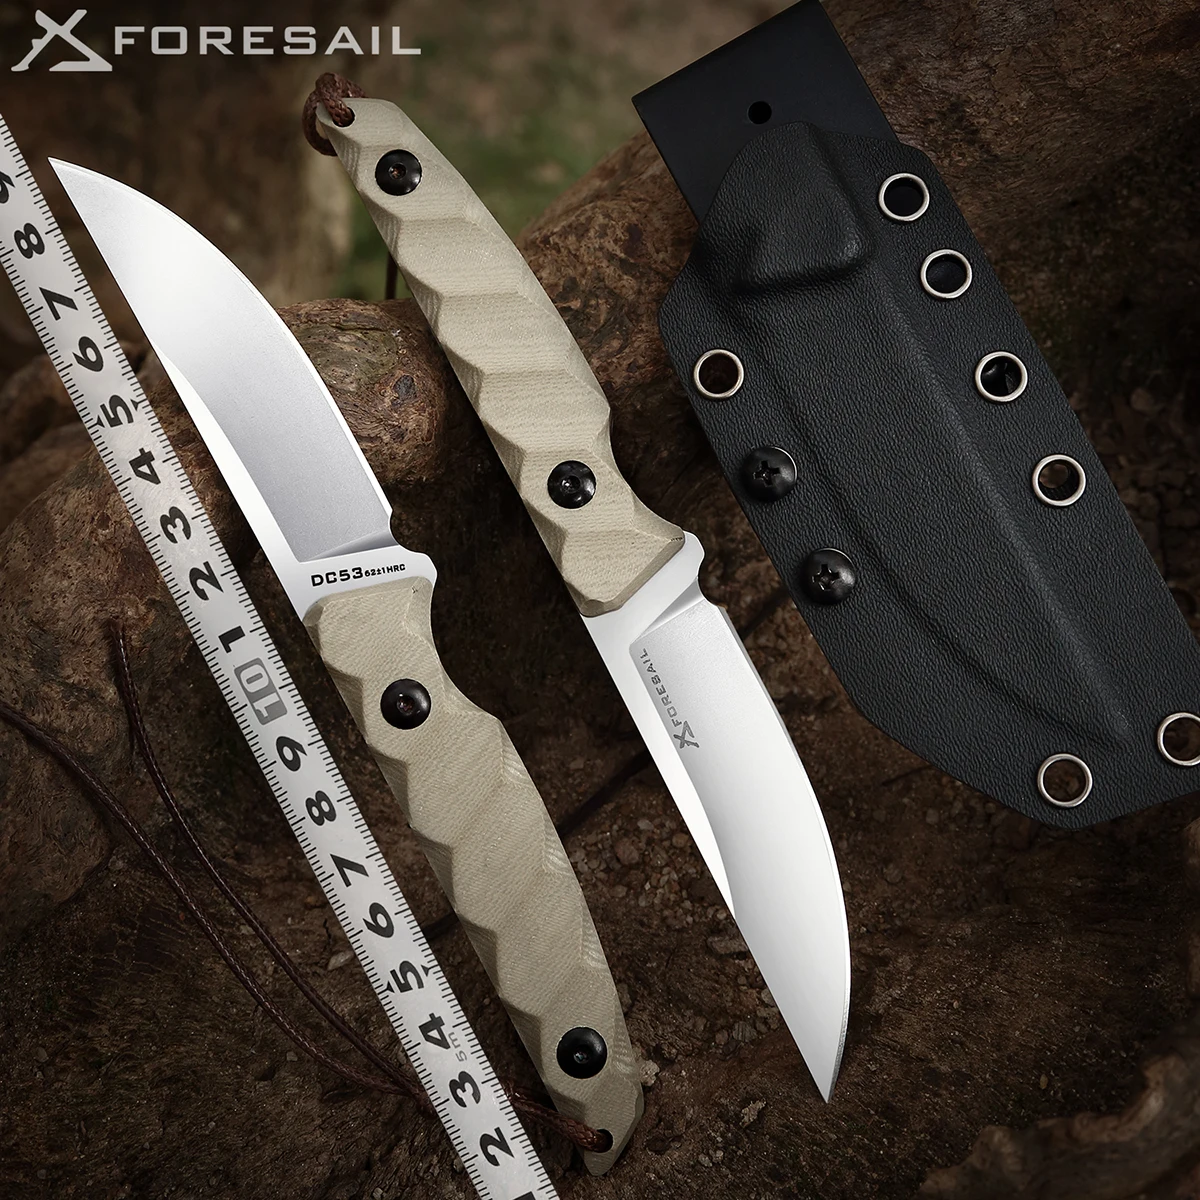 FORESAIL-High Quality DC53 Steel Tactical Knives Fixed Blade Knife Survival Rescue Hunting Knives Hunting Outdoor Gear  Tools